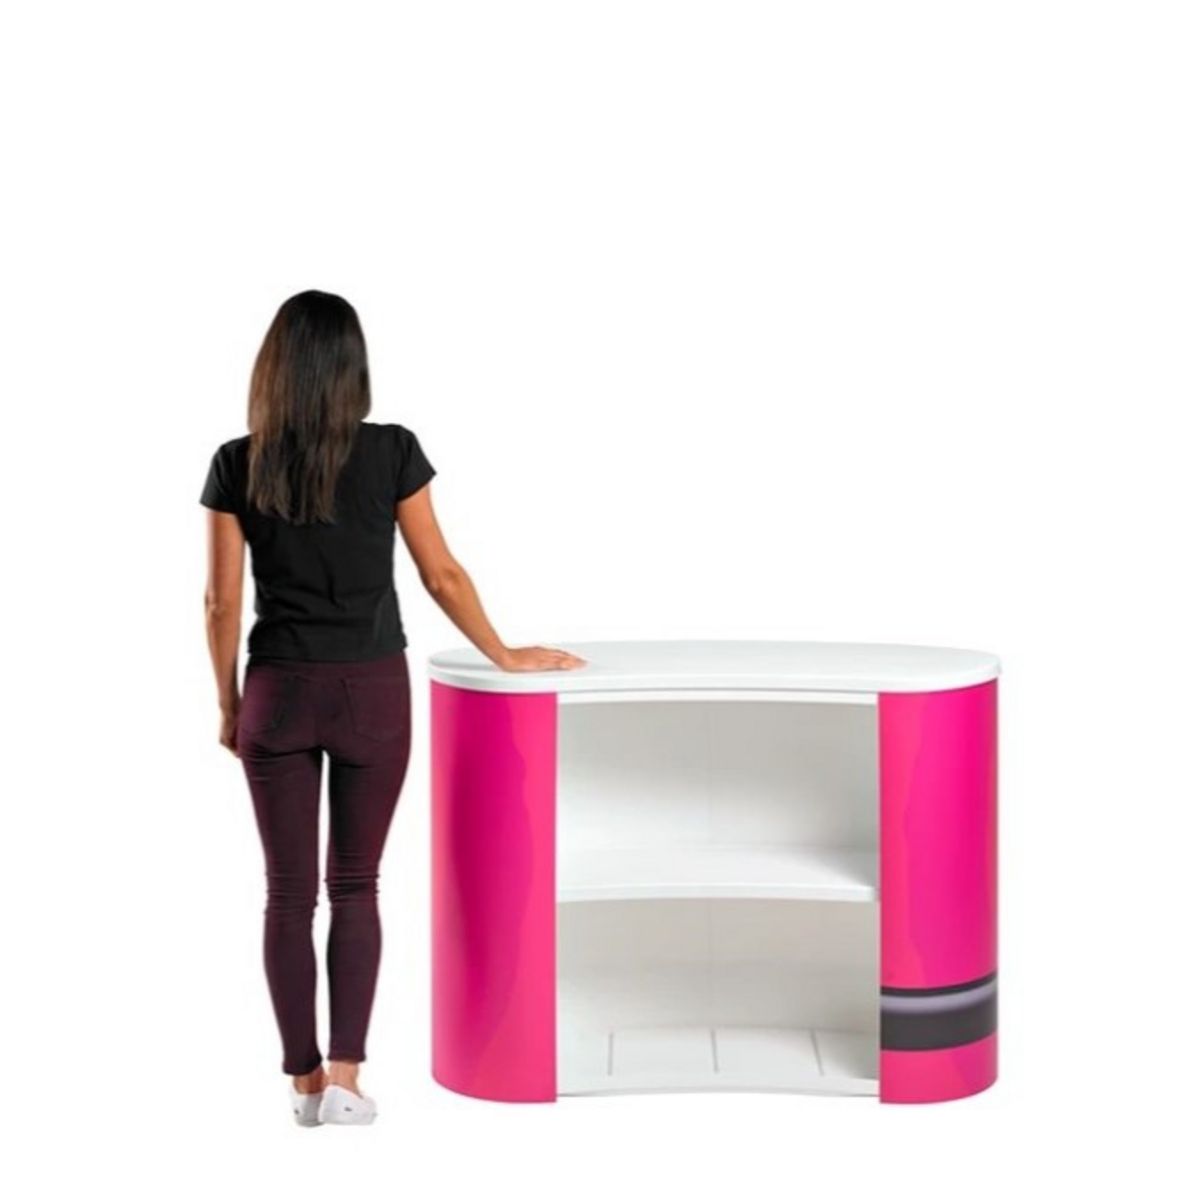 Back view of the Finesse promotional display counter including storage shelf..jpg